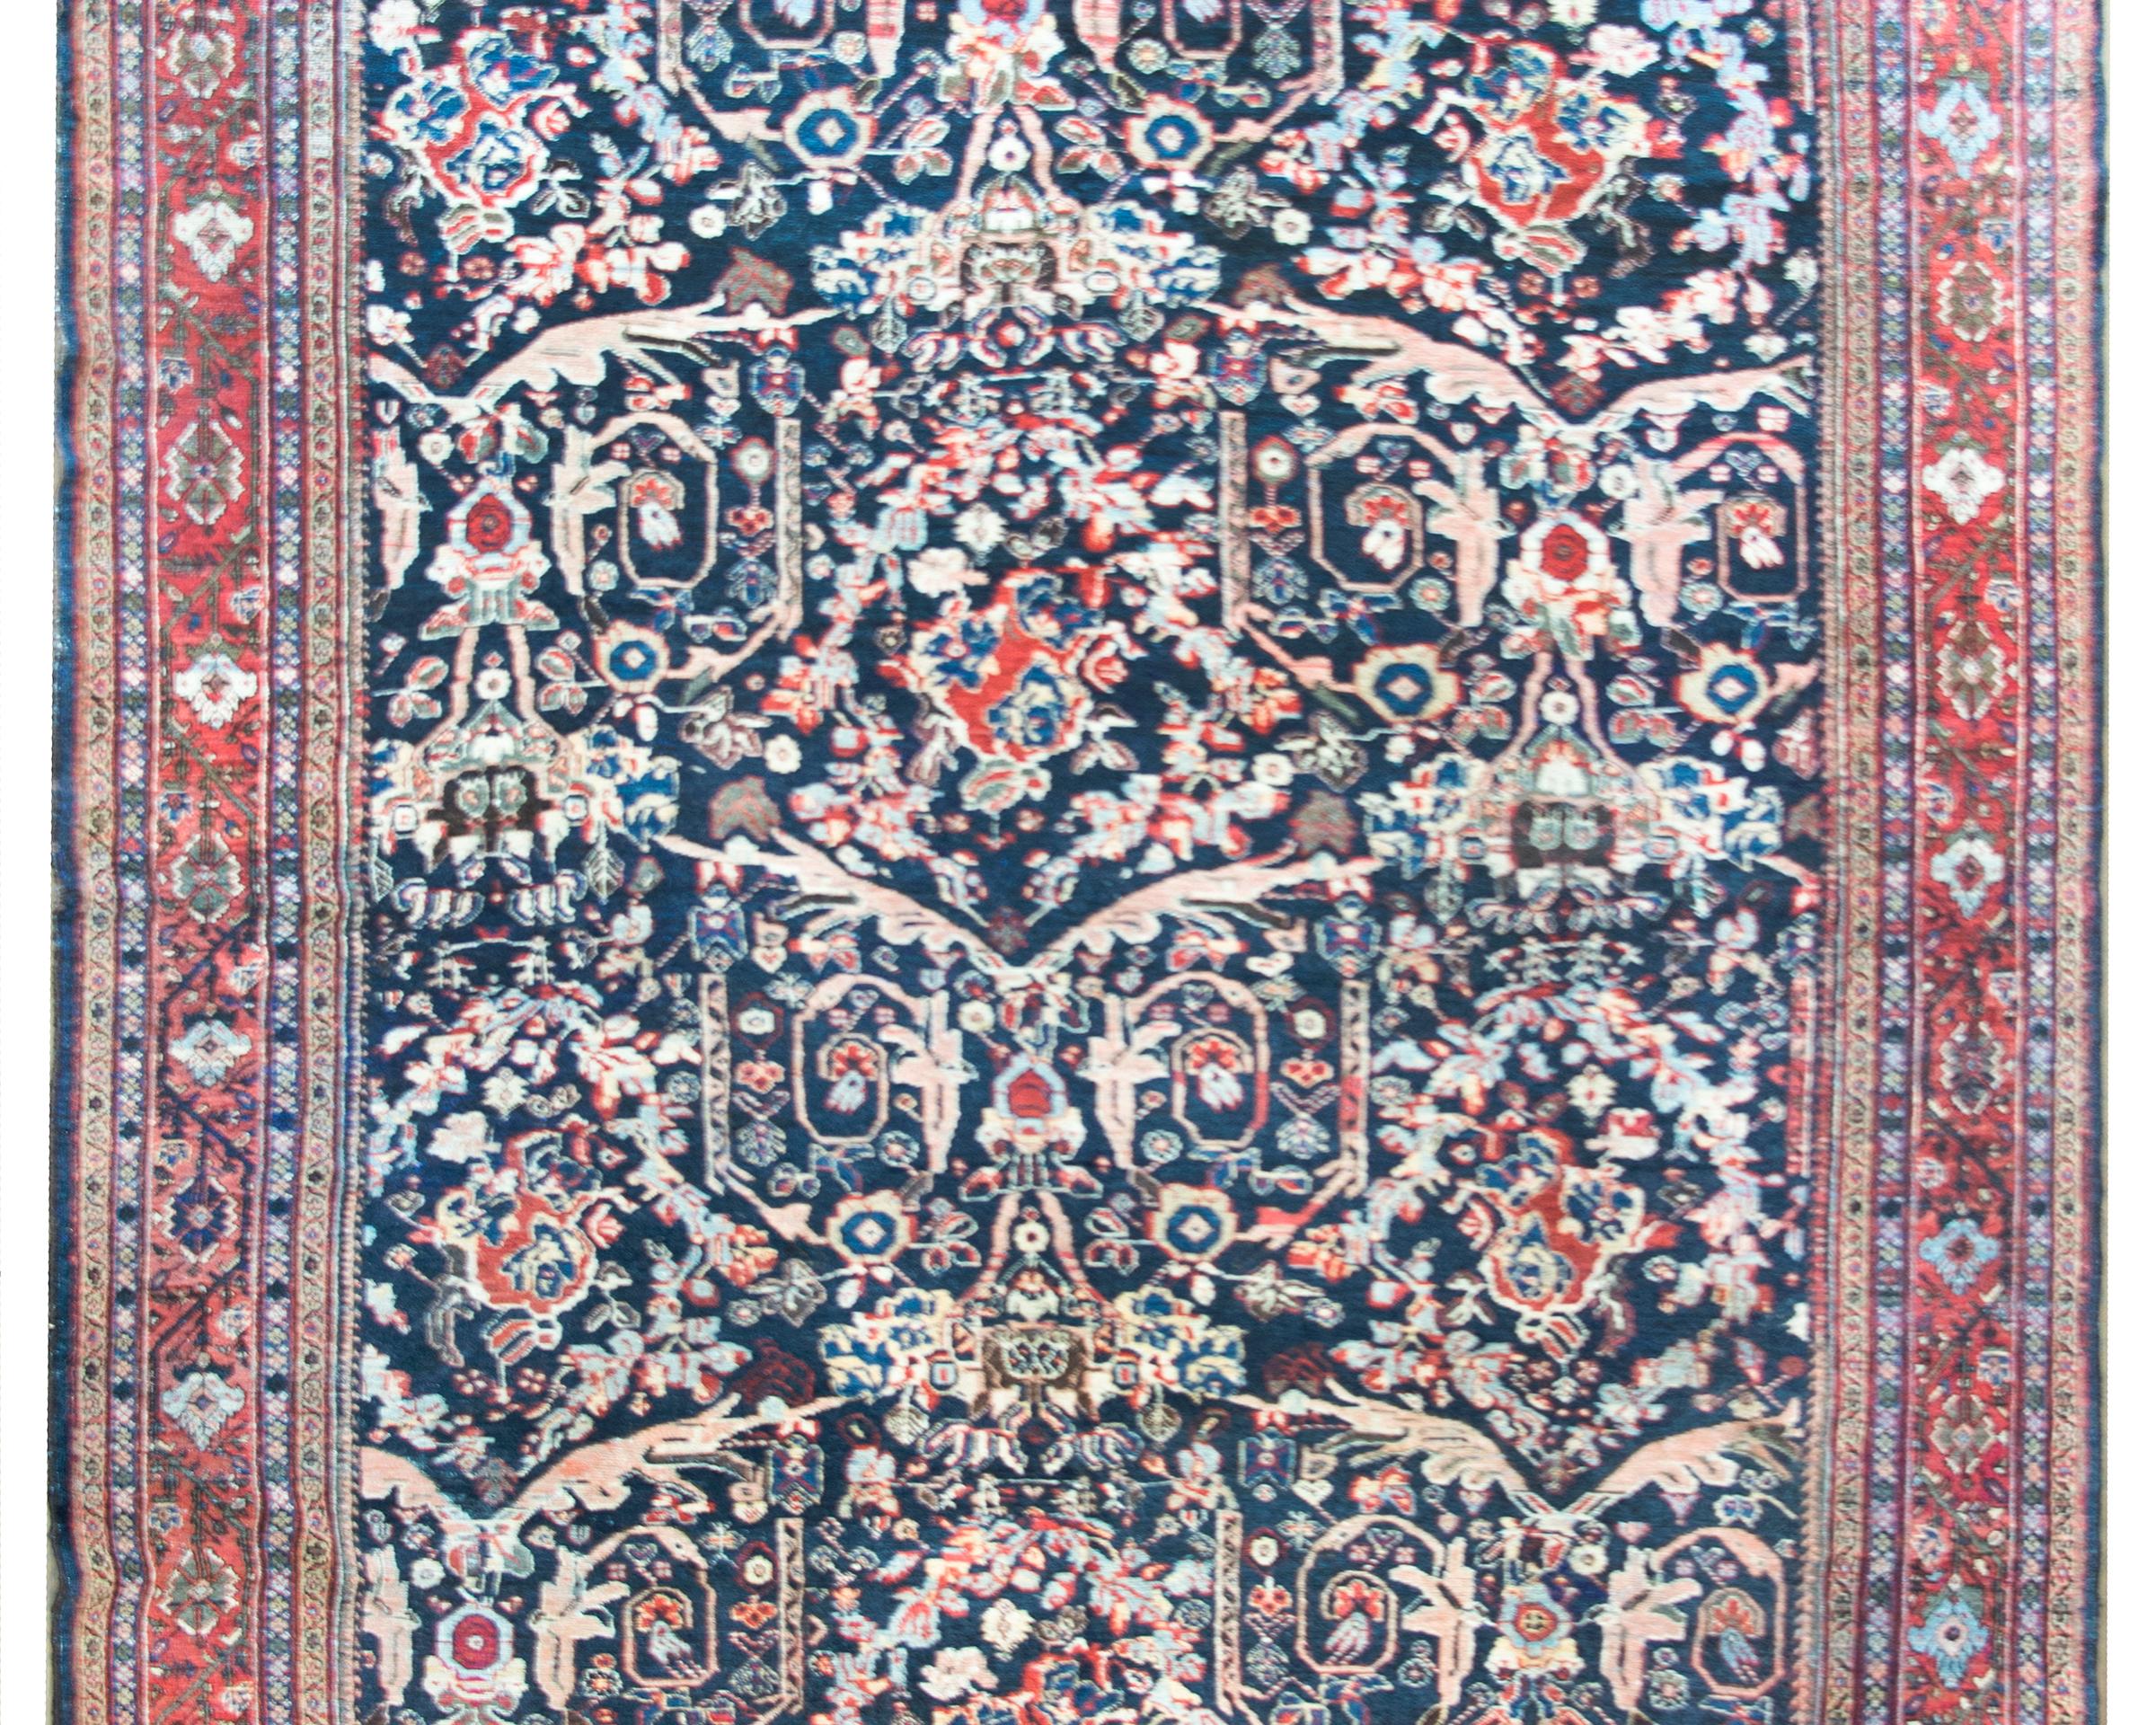 An incredible early 20th century Persian Mahal rug with the most wonderful all-over trellis floral pattern with myriad flowers, leaves, and scrolling vines woven in crimson, cream, light and dark indigo, pink, and cream, and surrounded by the most